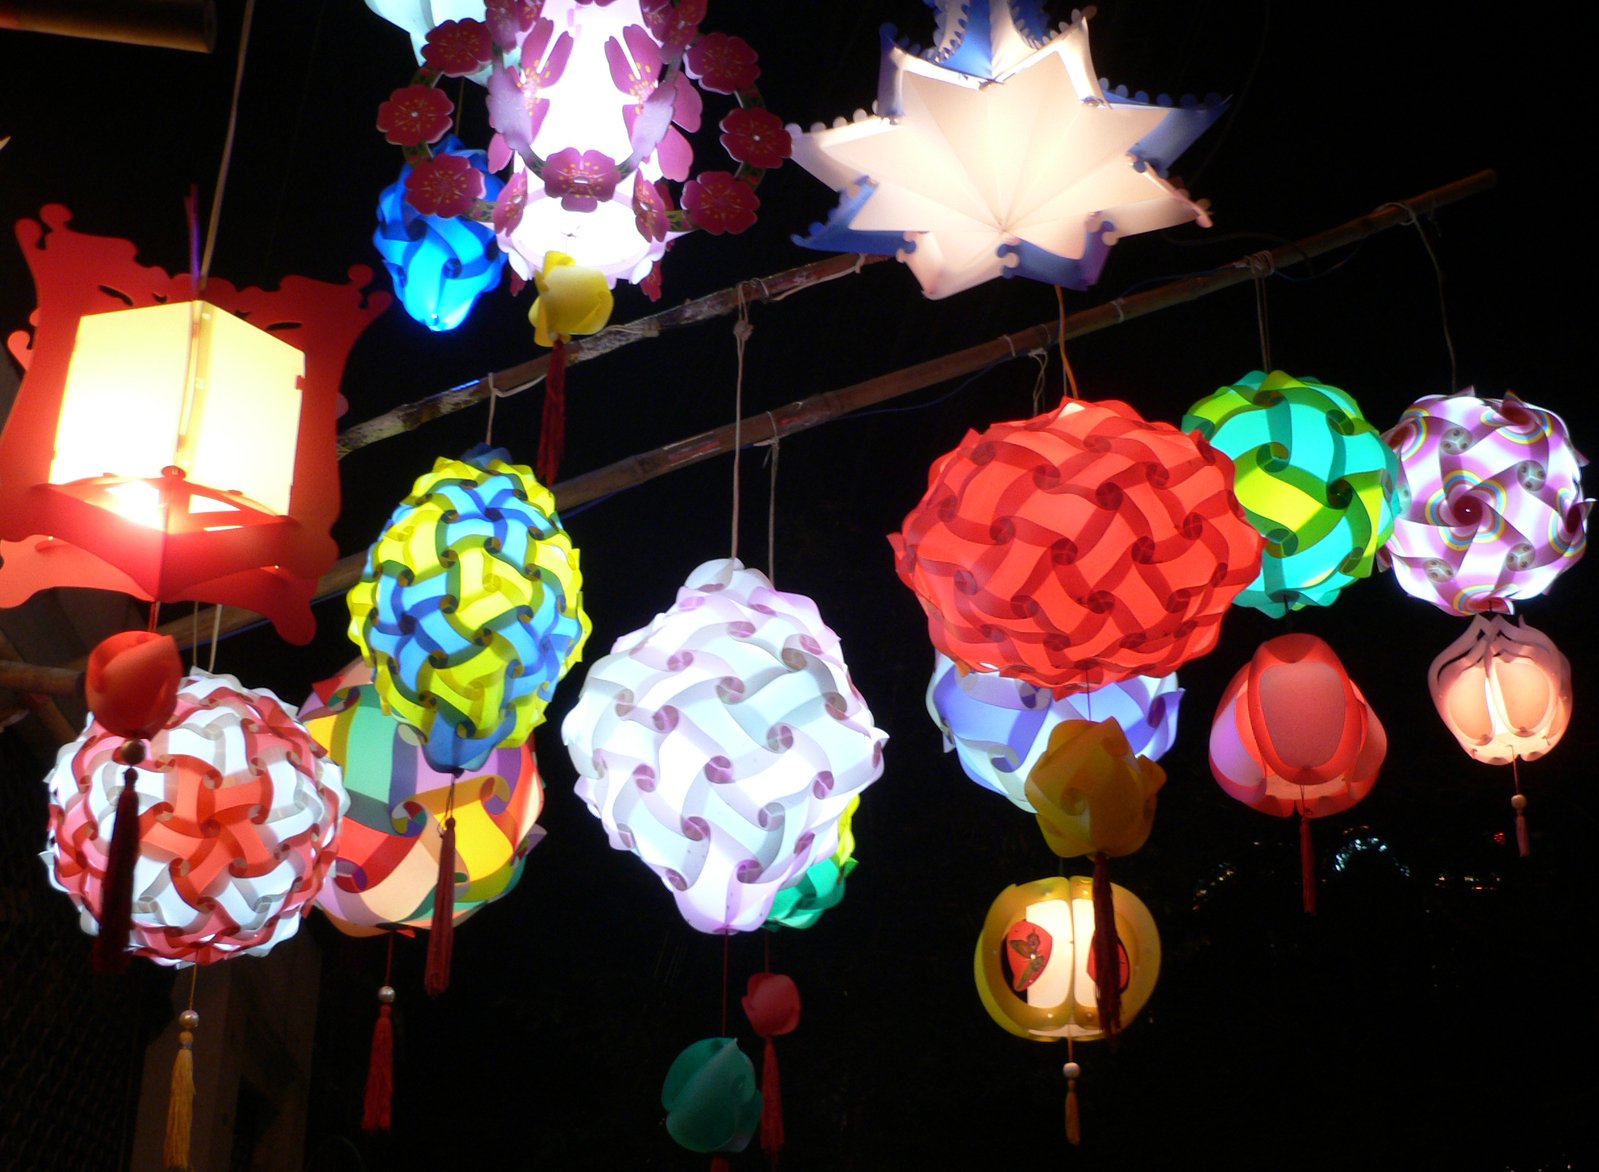 many different lanterns hanging on the ceiling